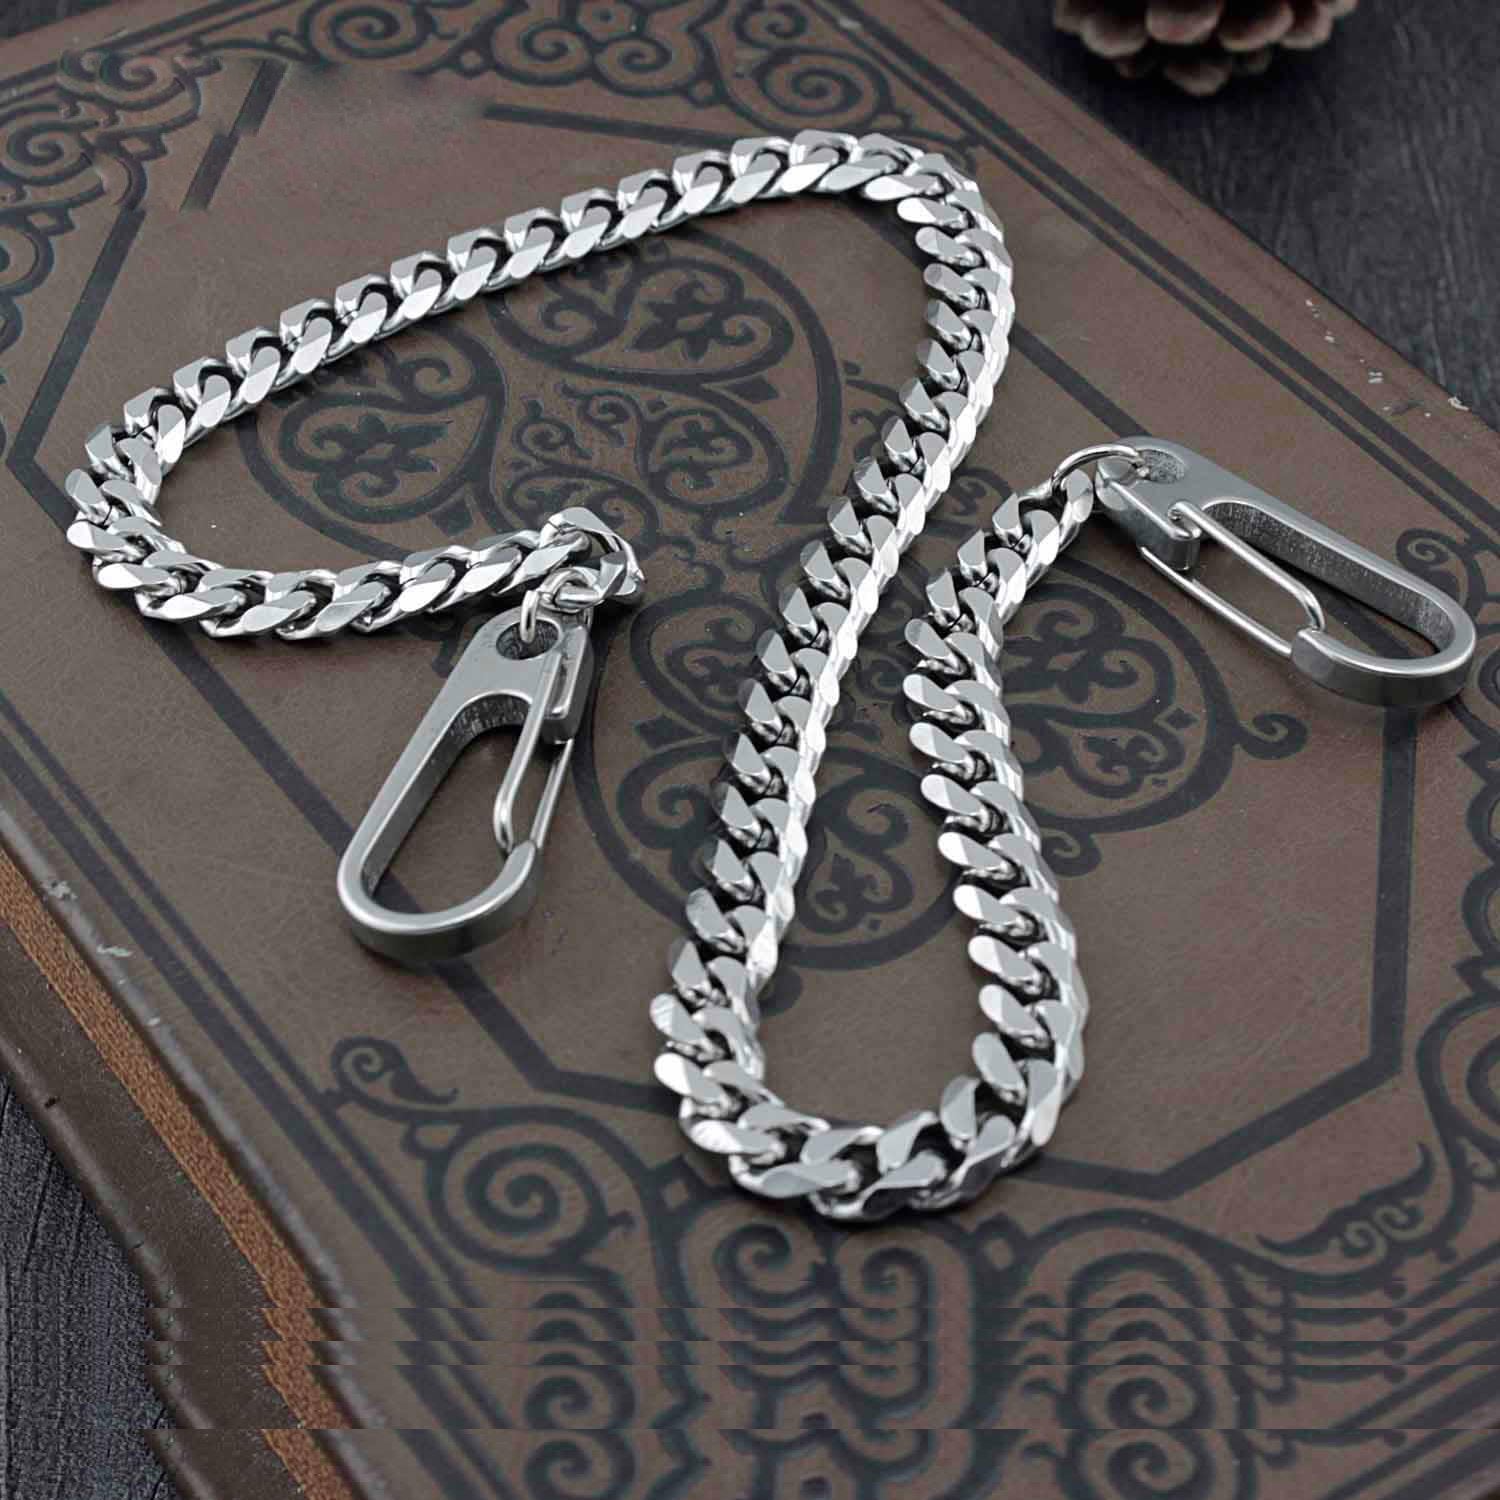 Sz Solid Stainless Steel Cool Punk Rock Wallet Chain Biker Trucker Wallet Chain Trucker Wallet Chain for Men Silver / 45cm